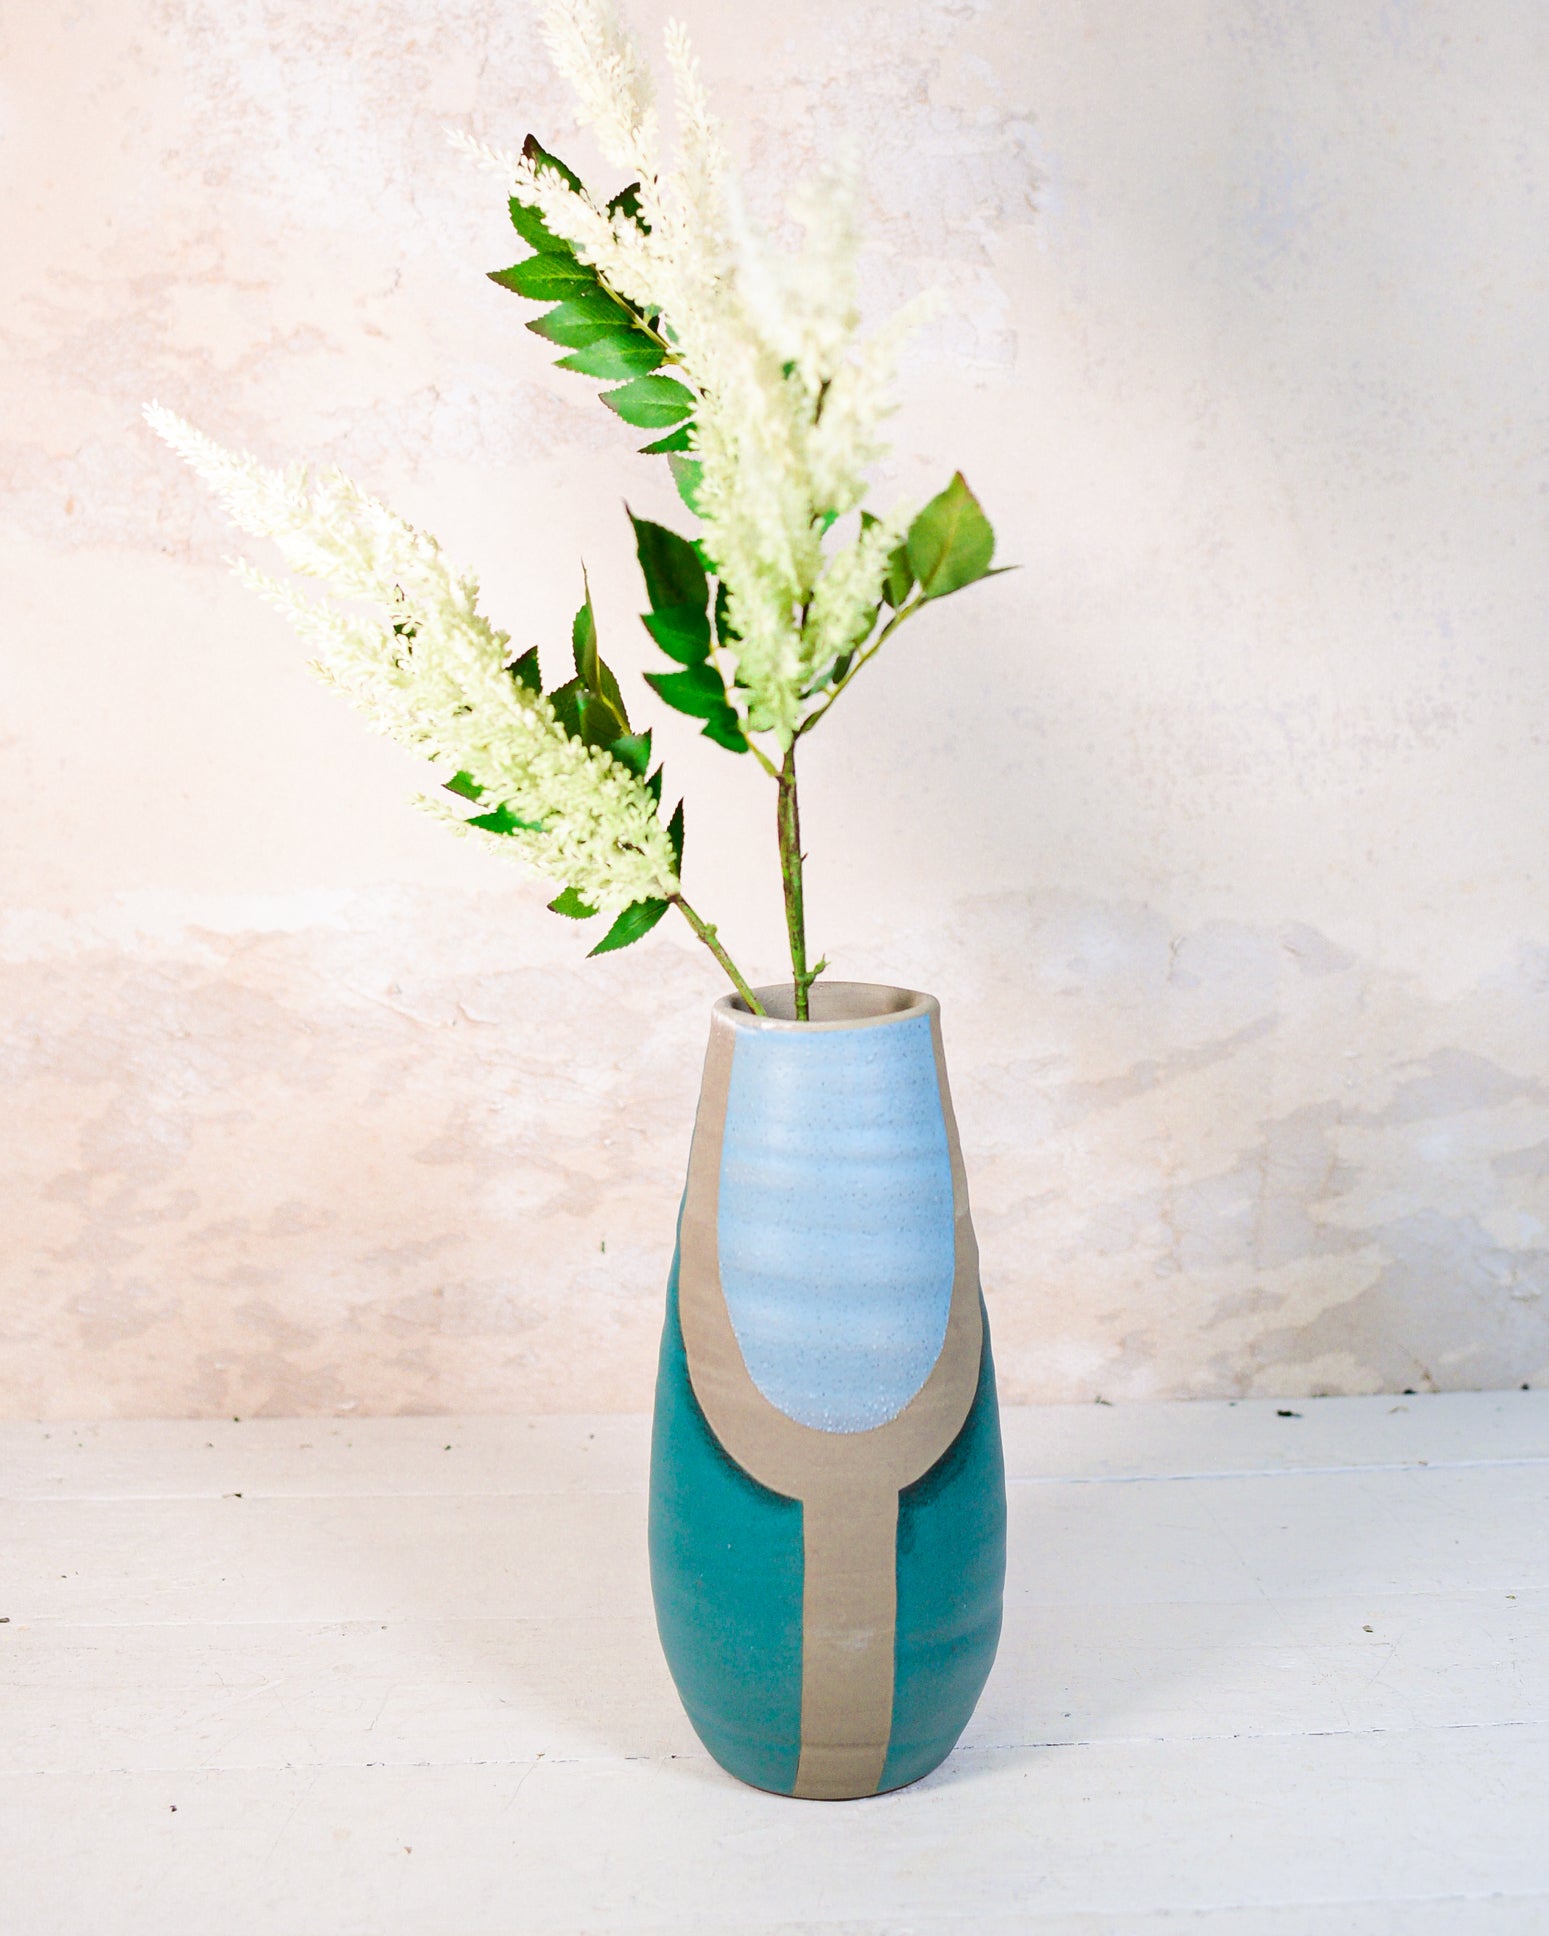 Hand-Painted Terracotta Vase Blue and Turquoise